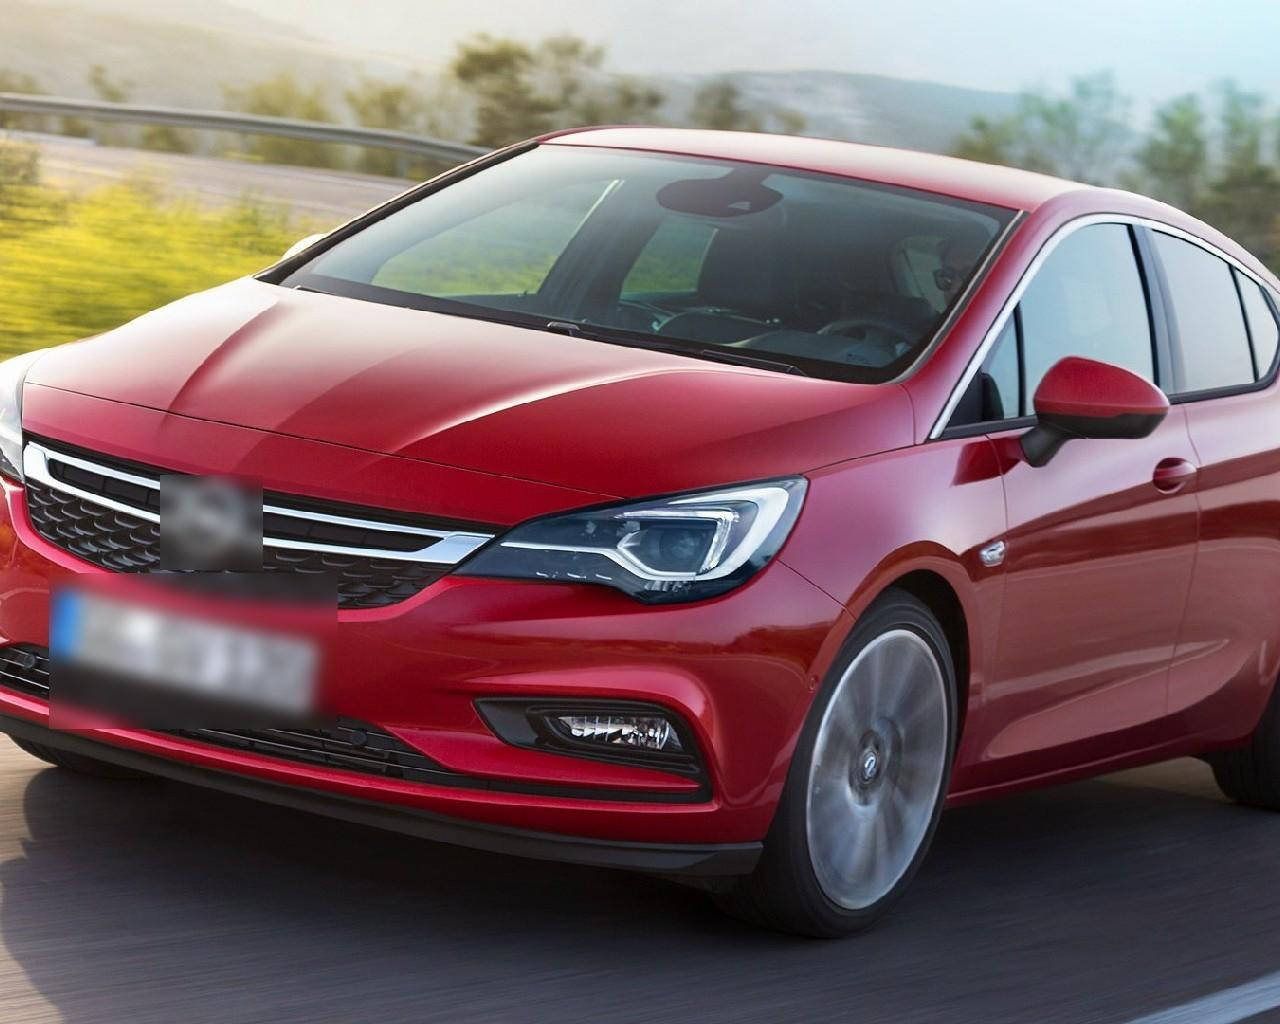 Red Opel Astra 2018 Background